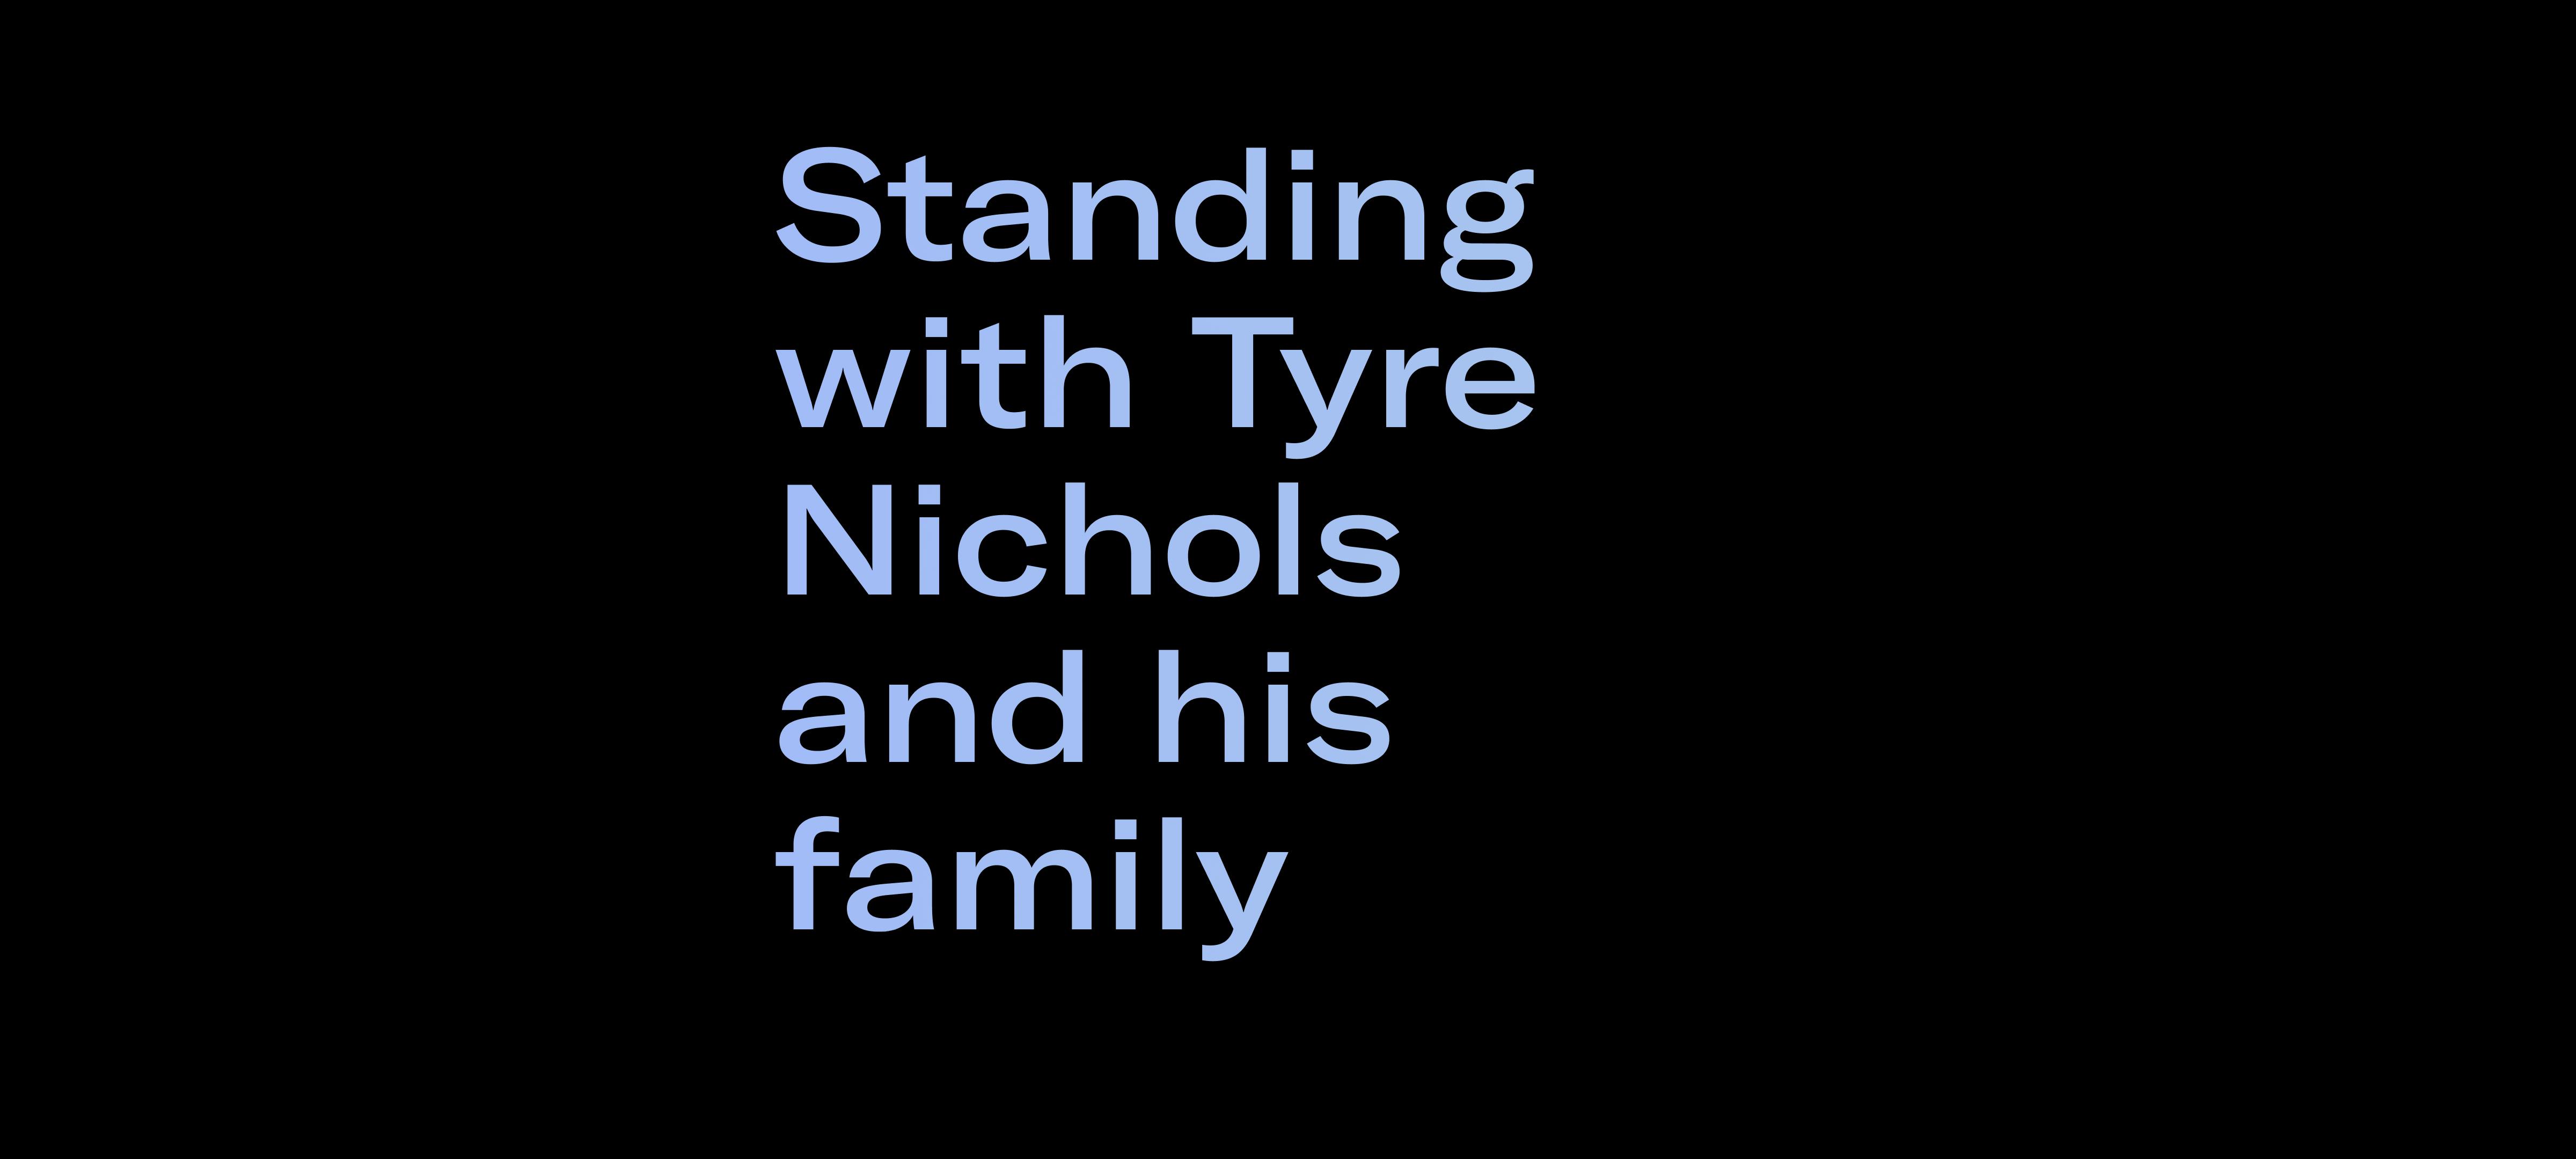 Standing with Tyre Nichols and his family